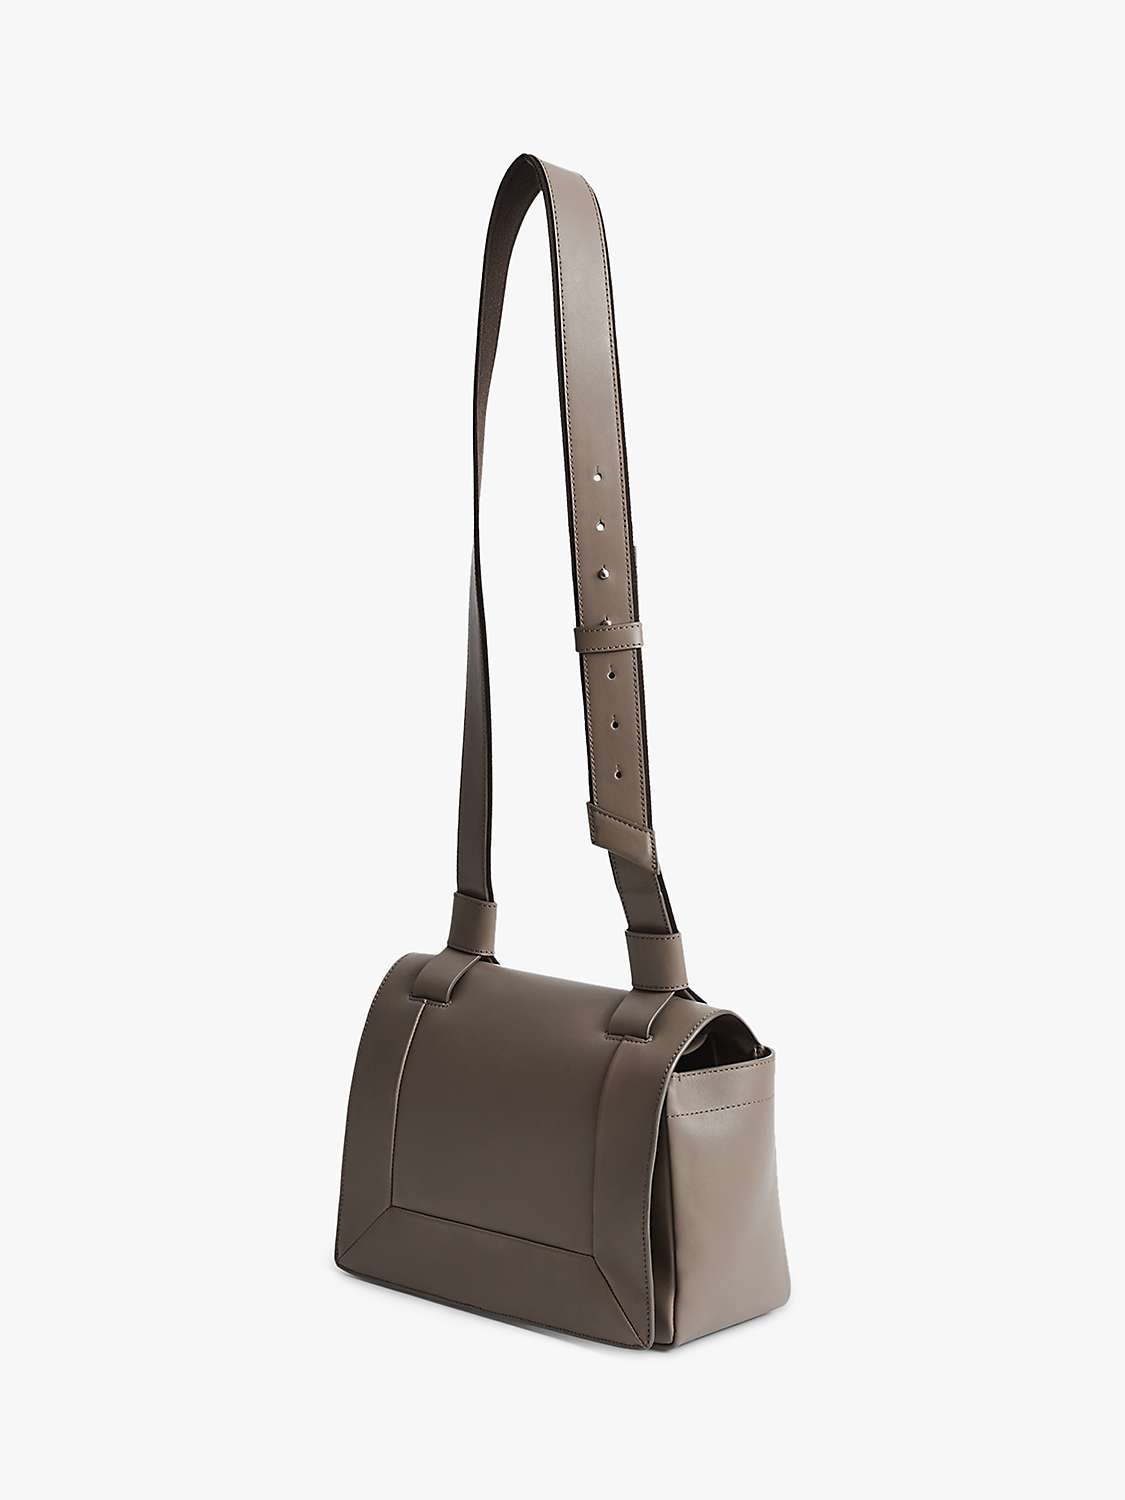 Buy Reiss Alma Leather Sporty Cross Body Bag, Taupe Online at johnlewis.com